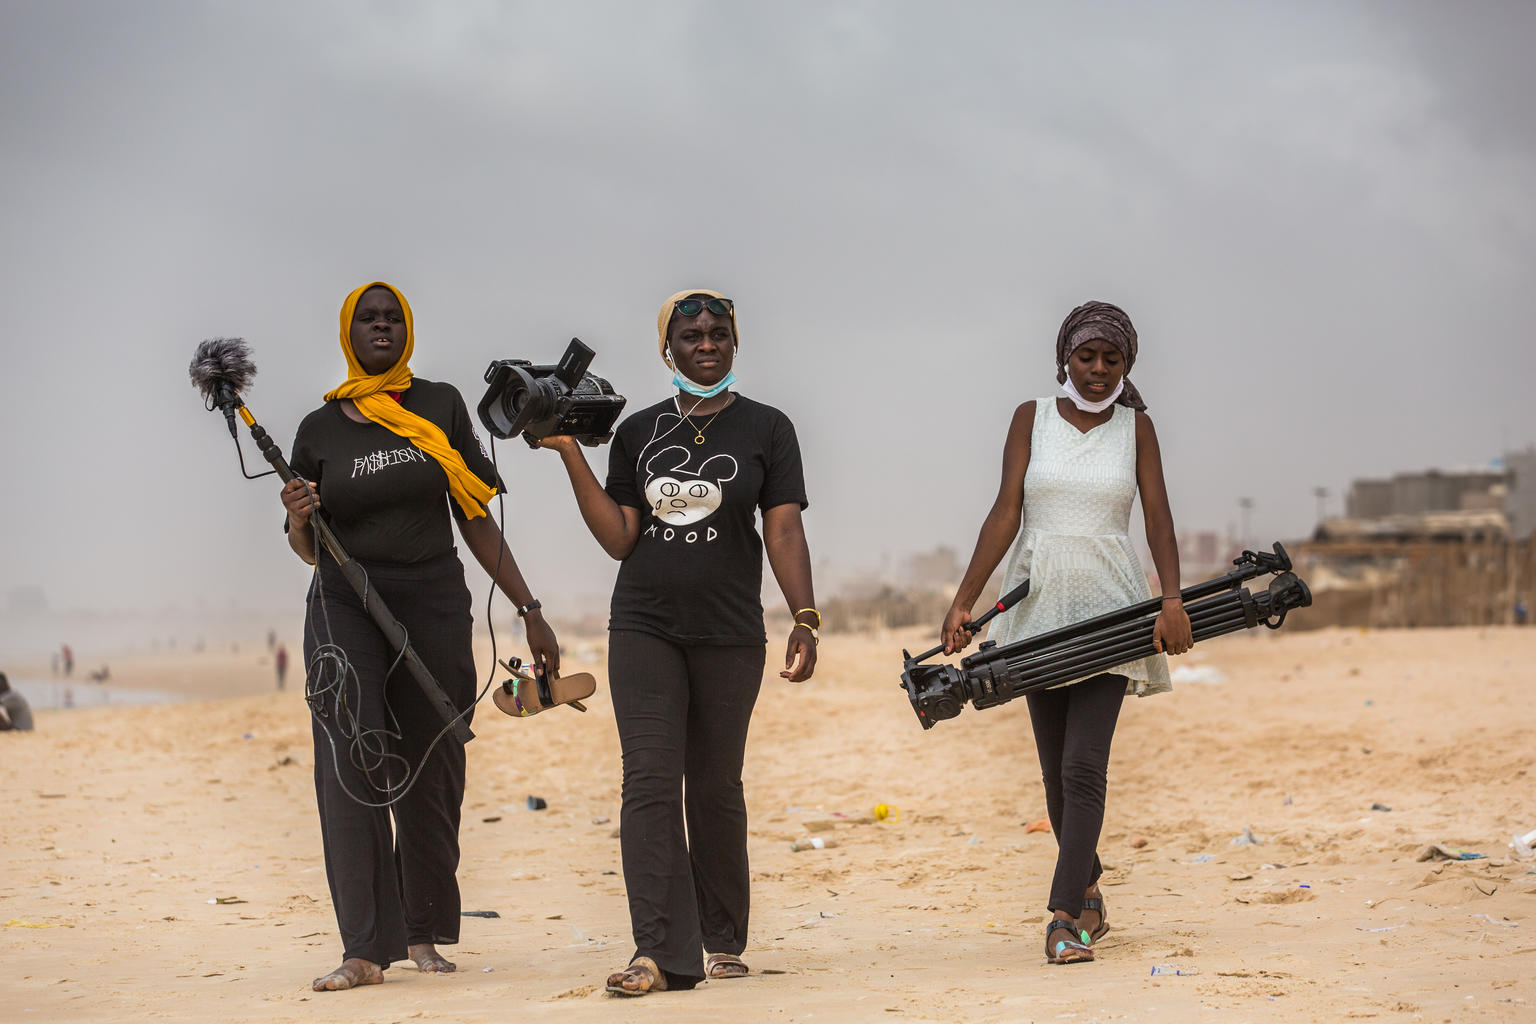 On 3 August 2020 in Dakar, Senegal, Oumou Kalsoum Diop (centre), 18, walks with Fatim Thiandoum (left) and Astou Diallo, both 17, looking to conduct spontaneous interviews with people on the beach to be used as part of a documentary on democracy in the country.